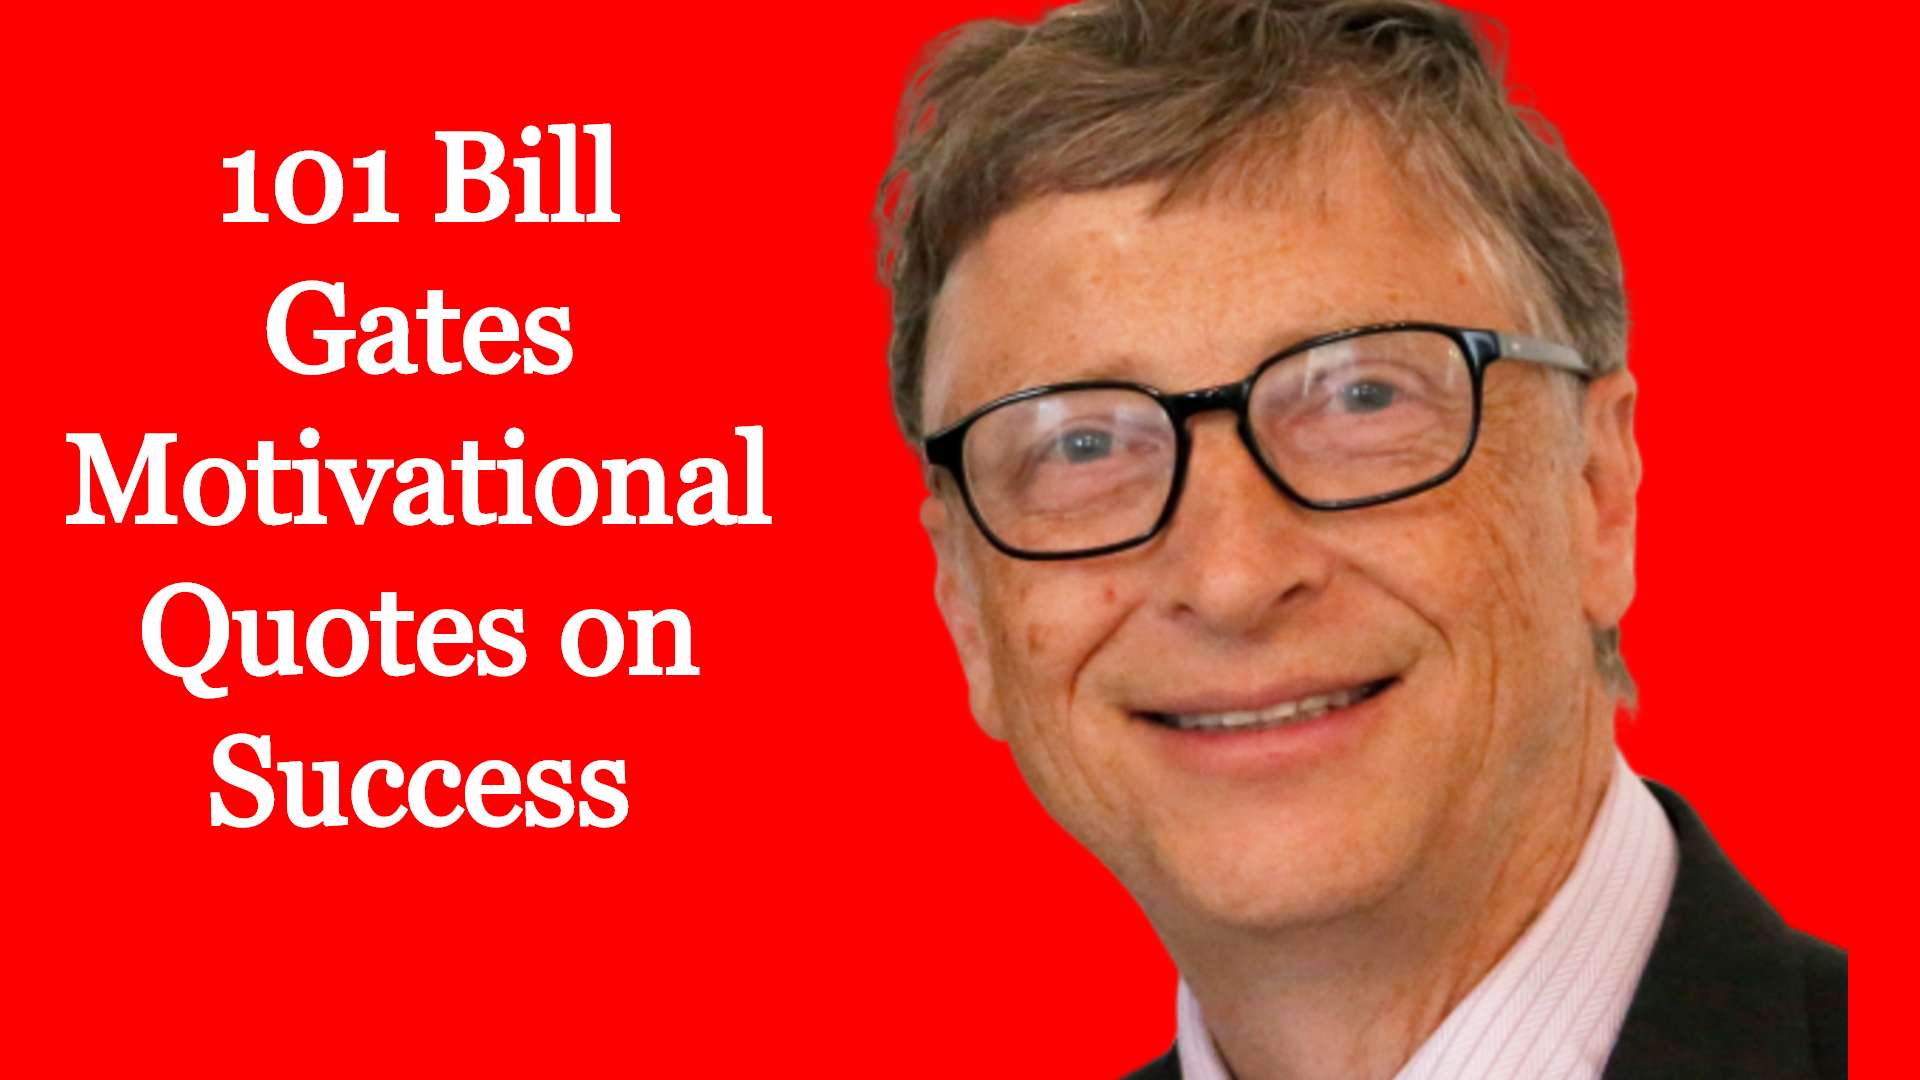 101 Bill Gates Motivational Quotes on Success